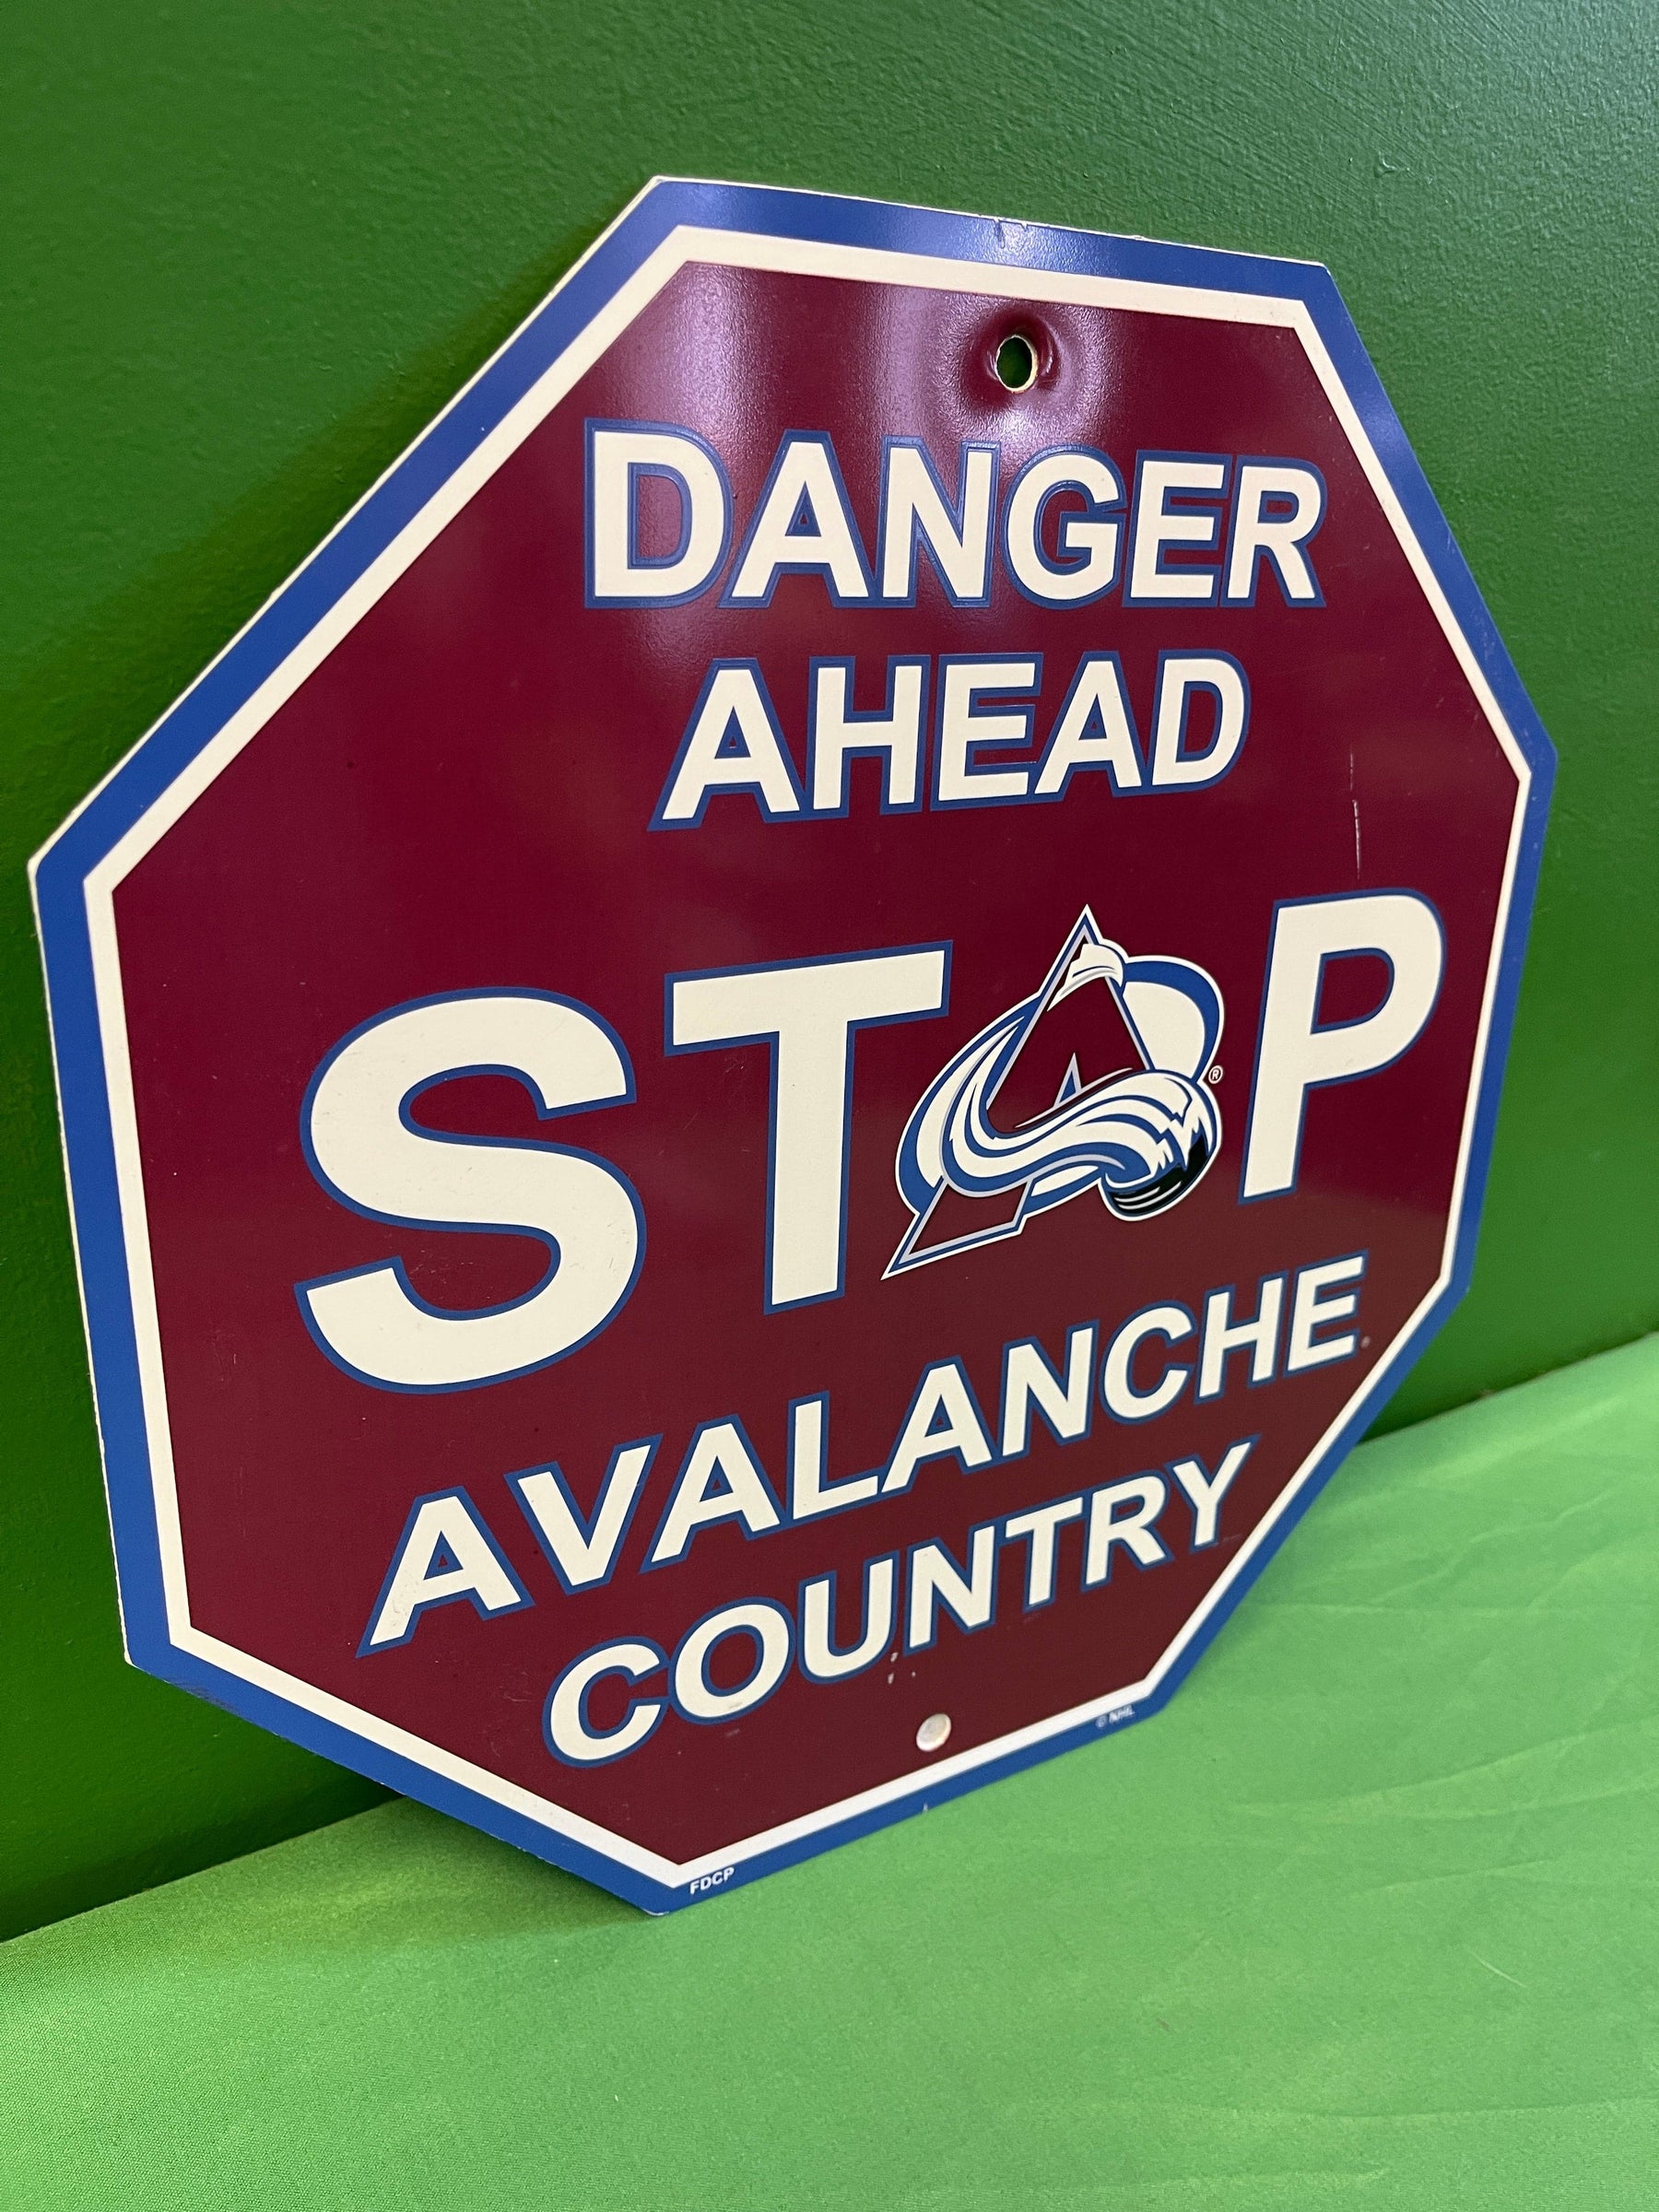 NHL Colorado Avalanche Stop Avalanche Country Plastic Sign